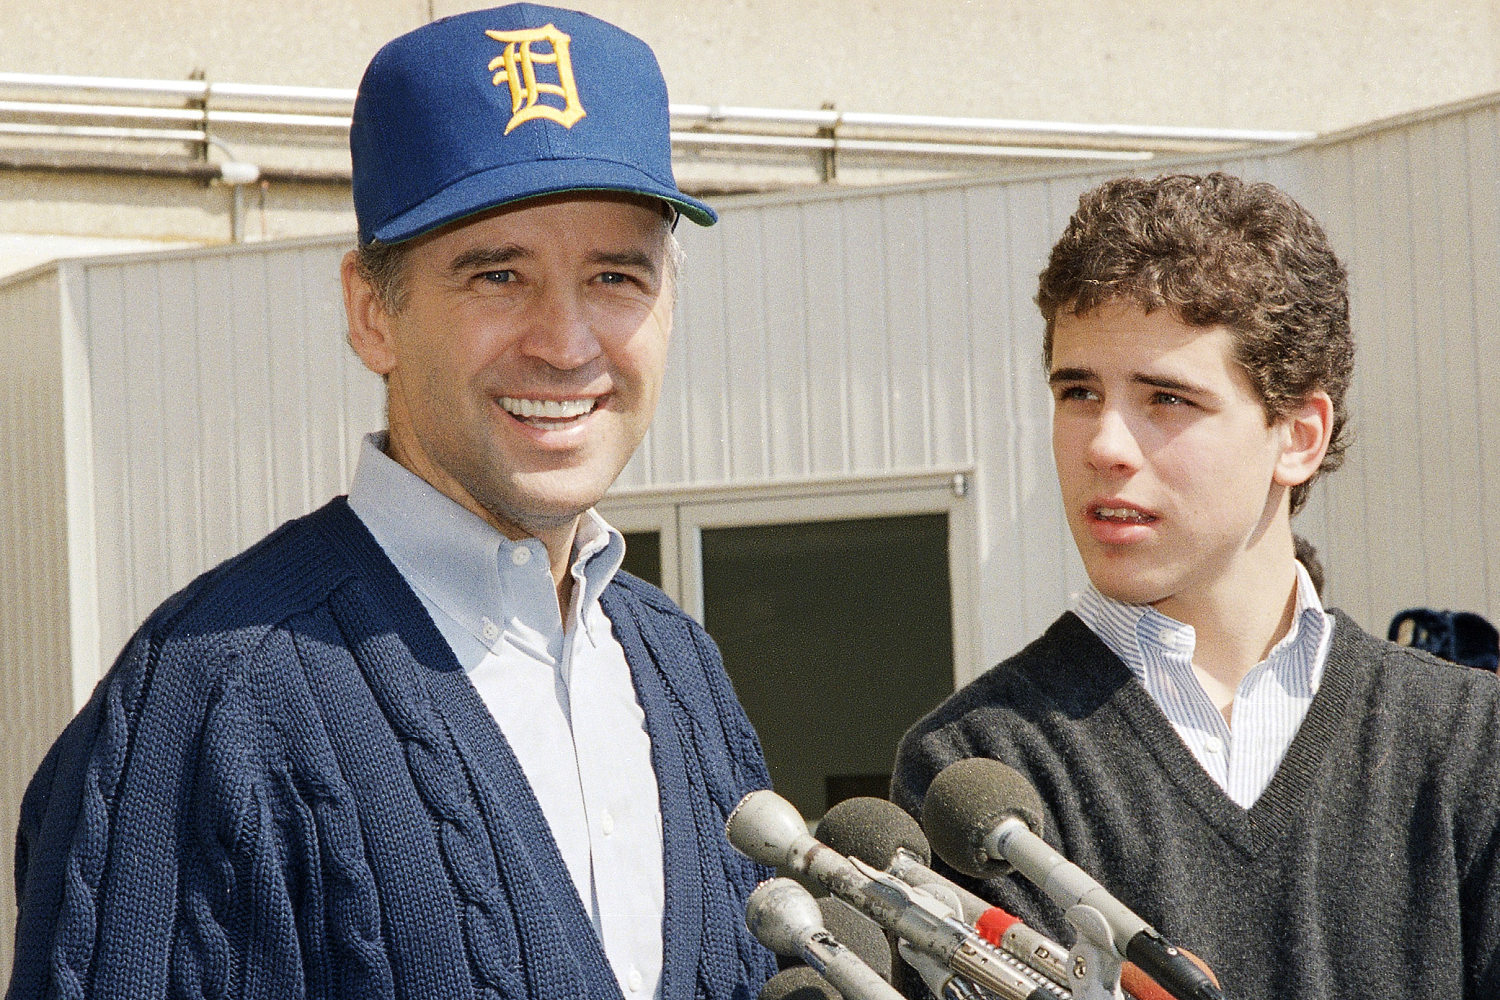 Hunter Biden and I are both prodigal sons. We’d still be lost without our dads.